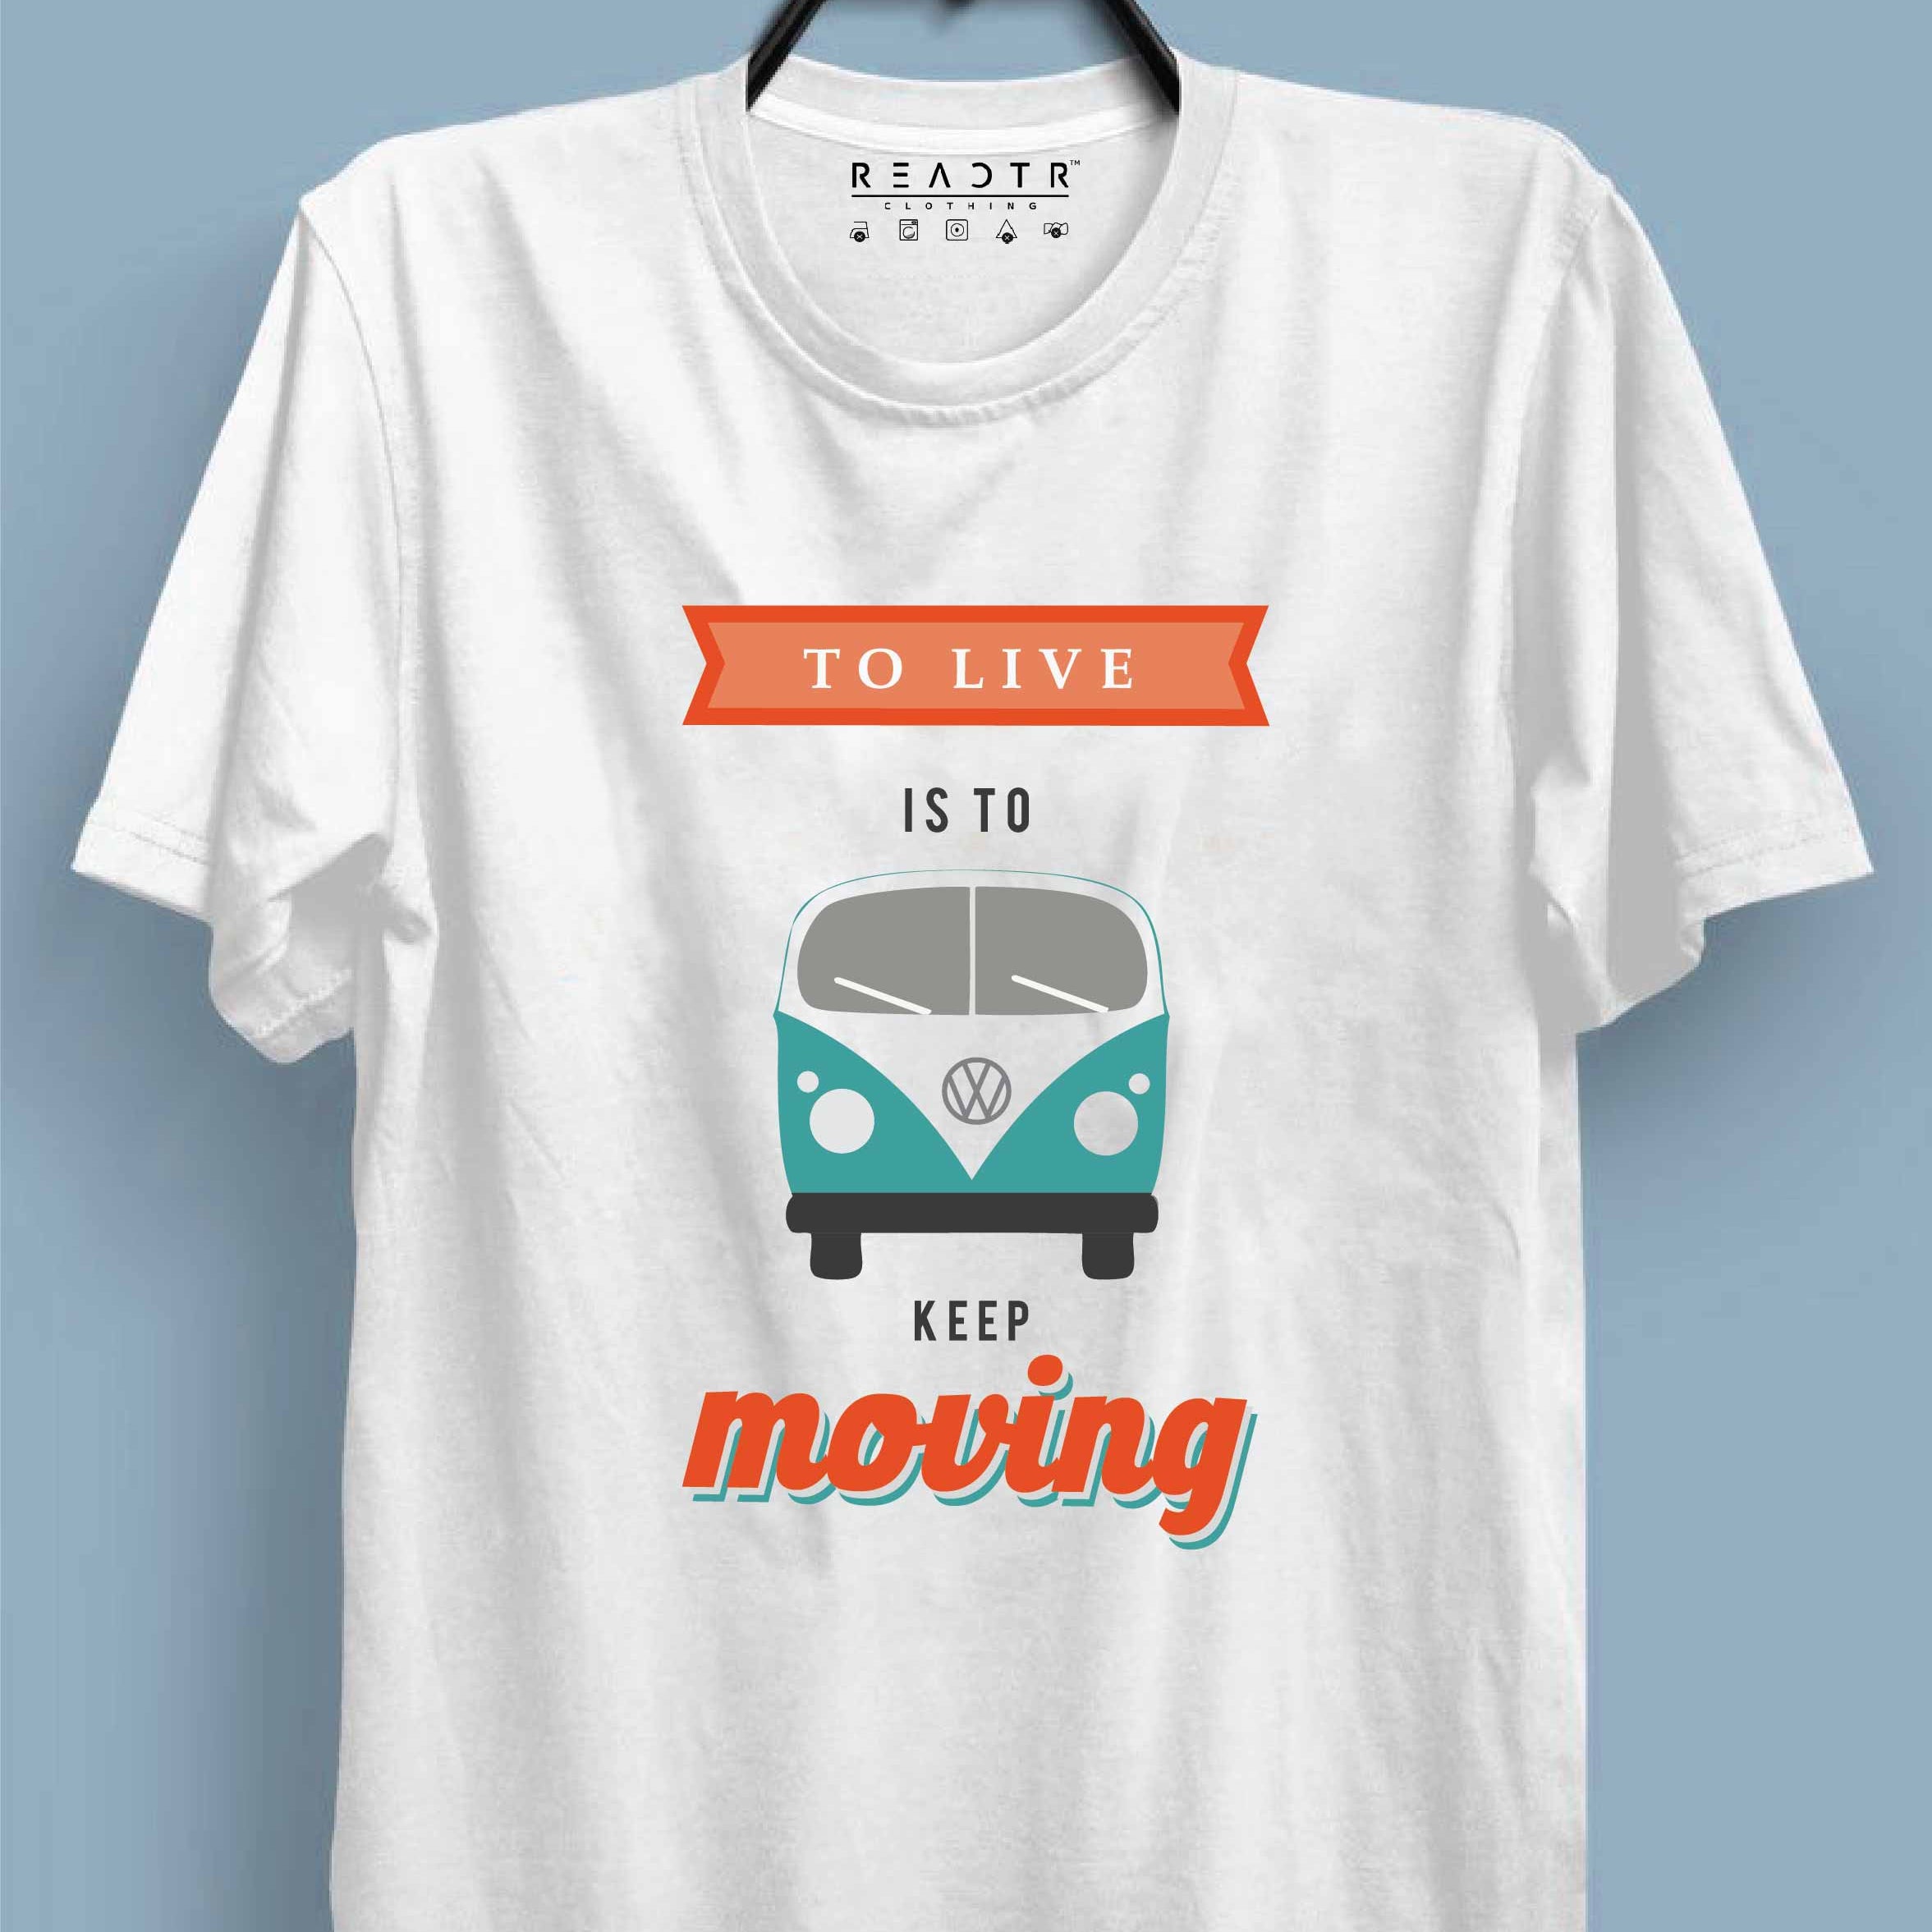 To Live Is To Keep Moving - Eyewearlabs